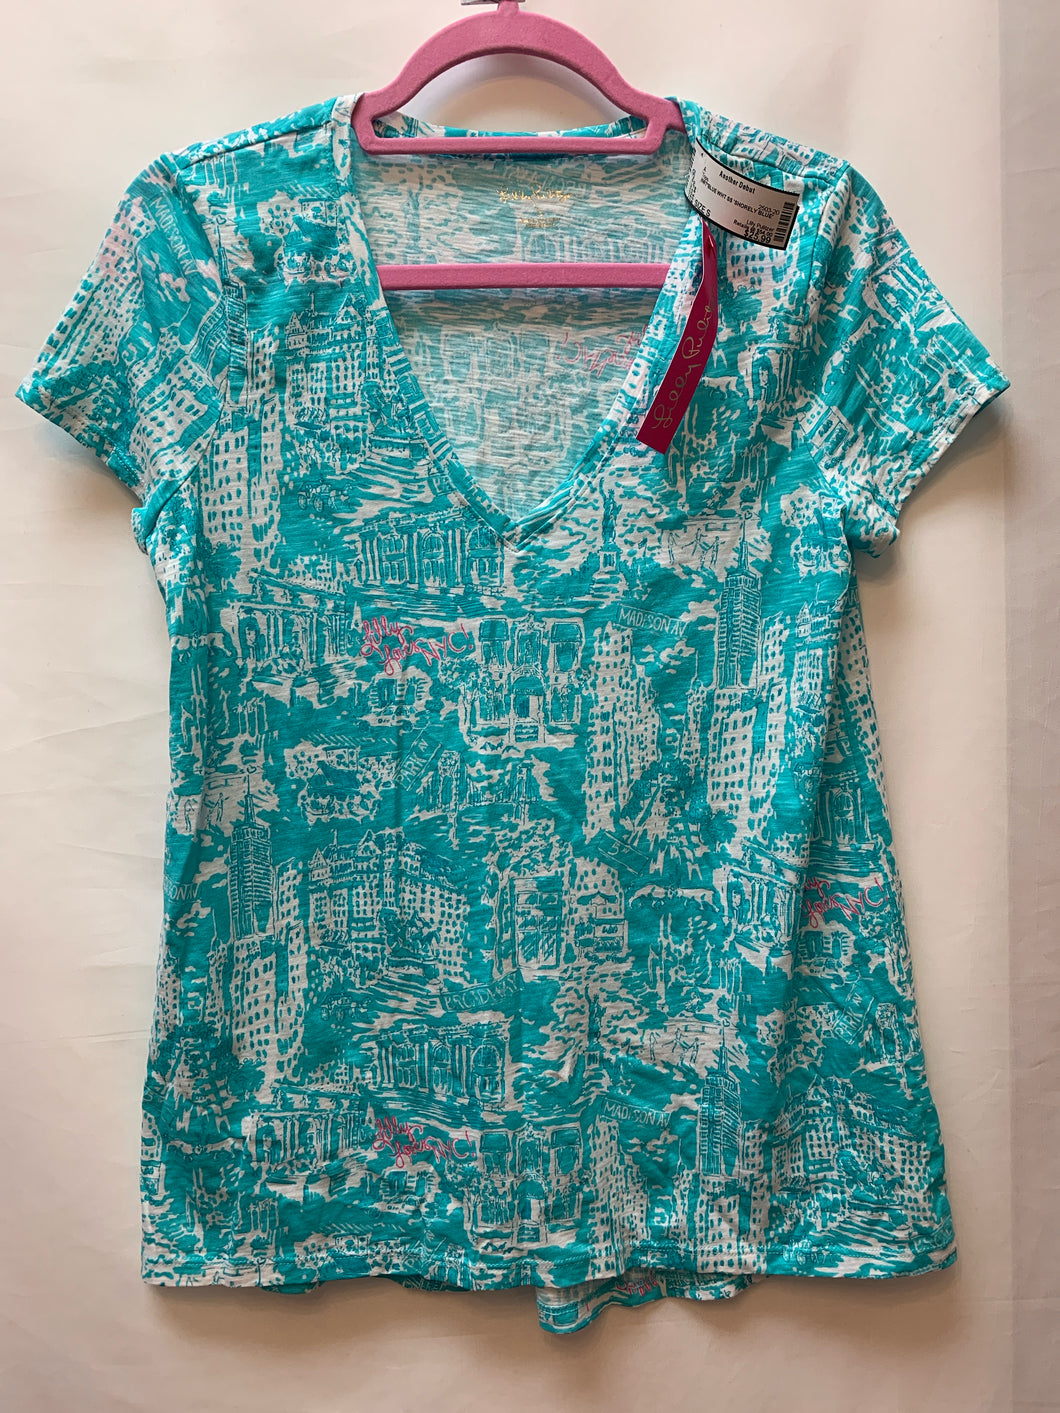 SIZE S Lilly Pulitzer Tops